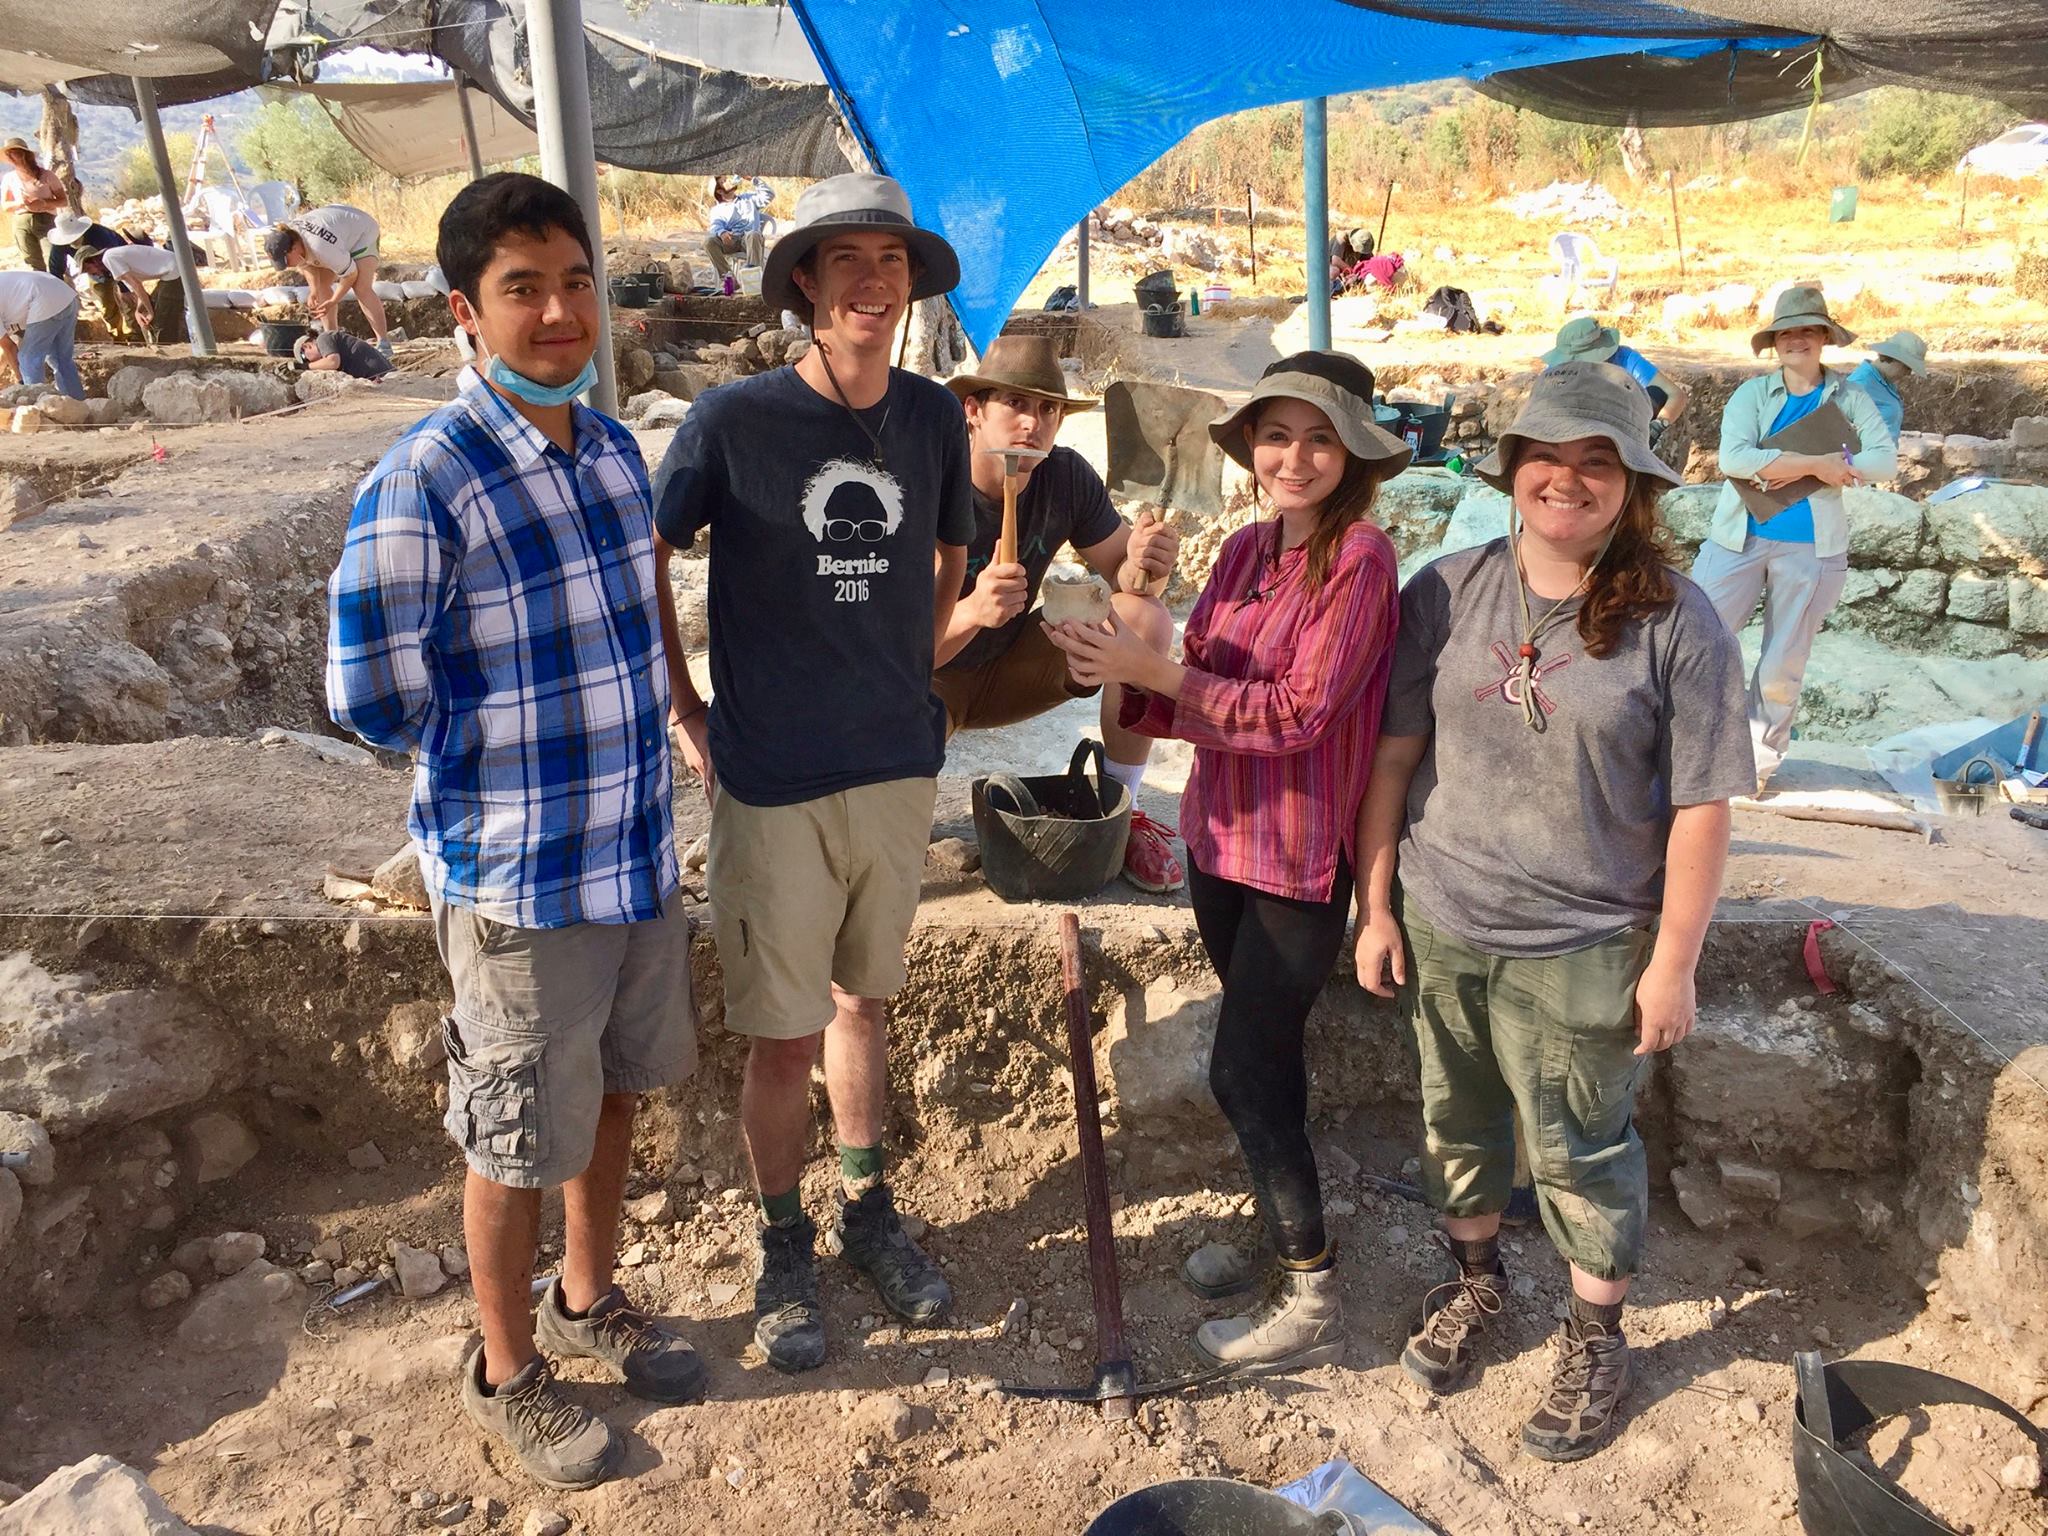 CC students with the ceramic jar discovered in their square on the Israel dig